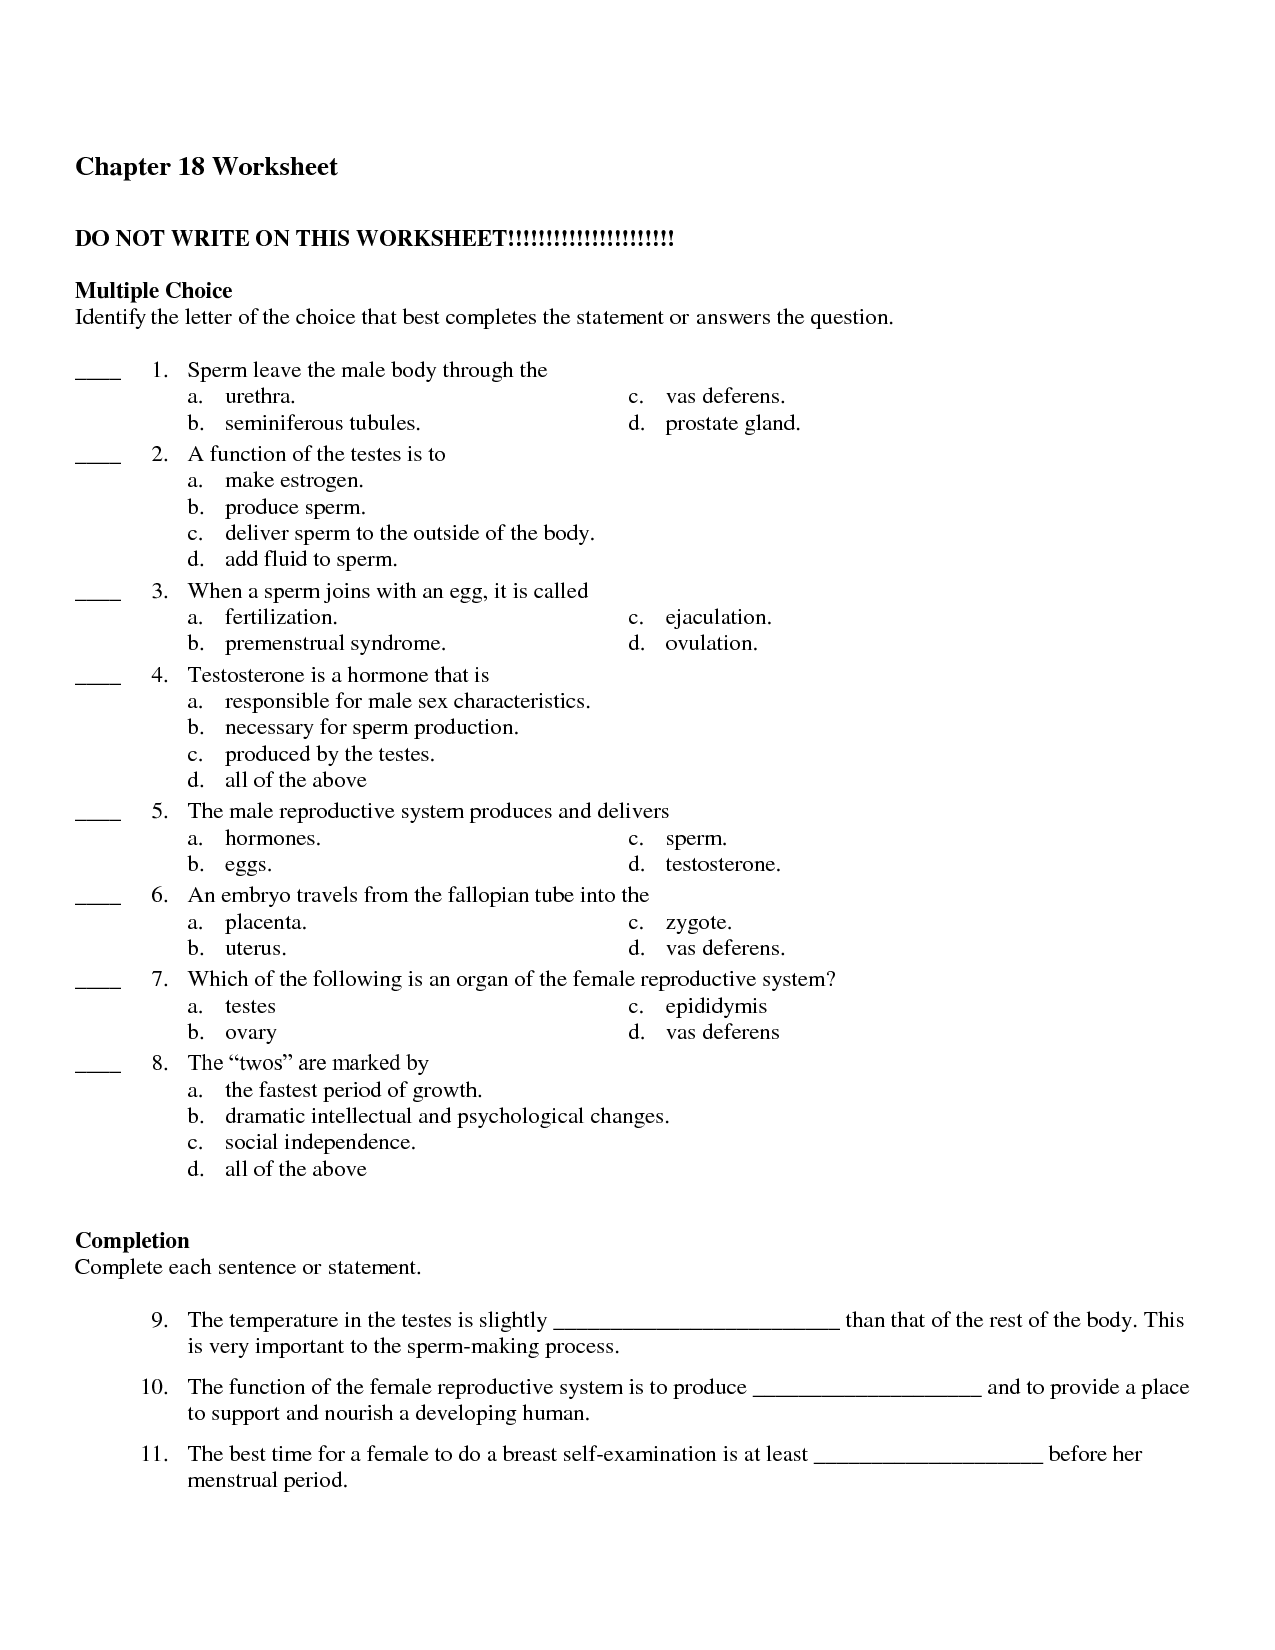 Human Female Reproductive System Worksheet Answers